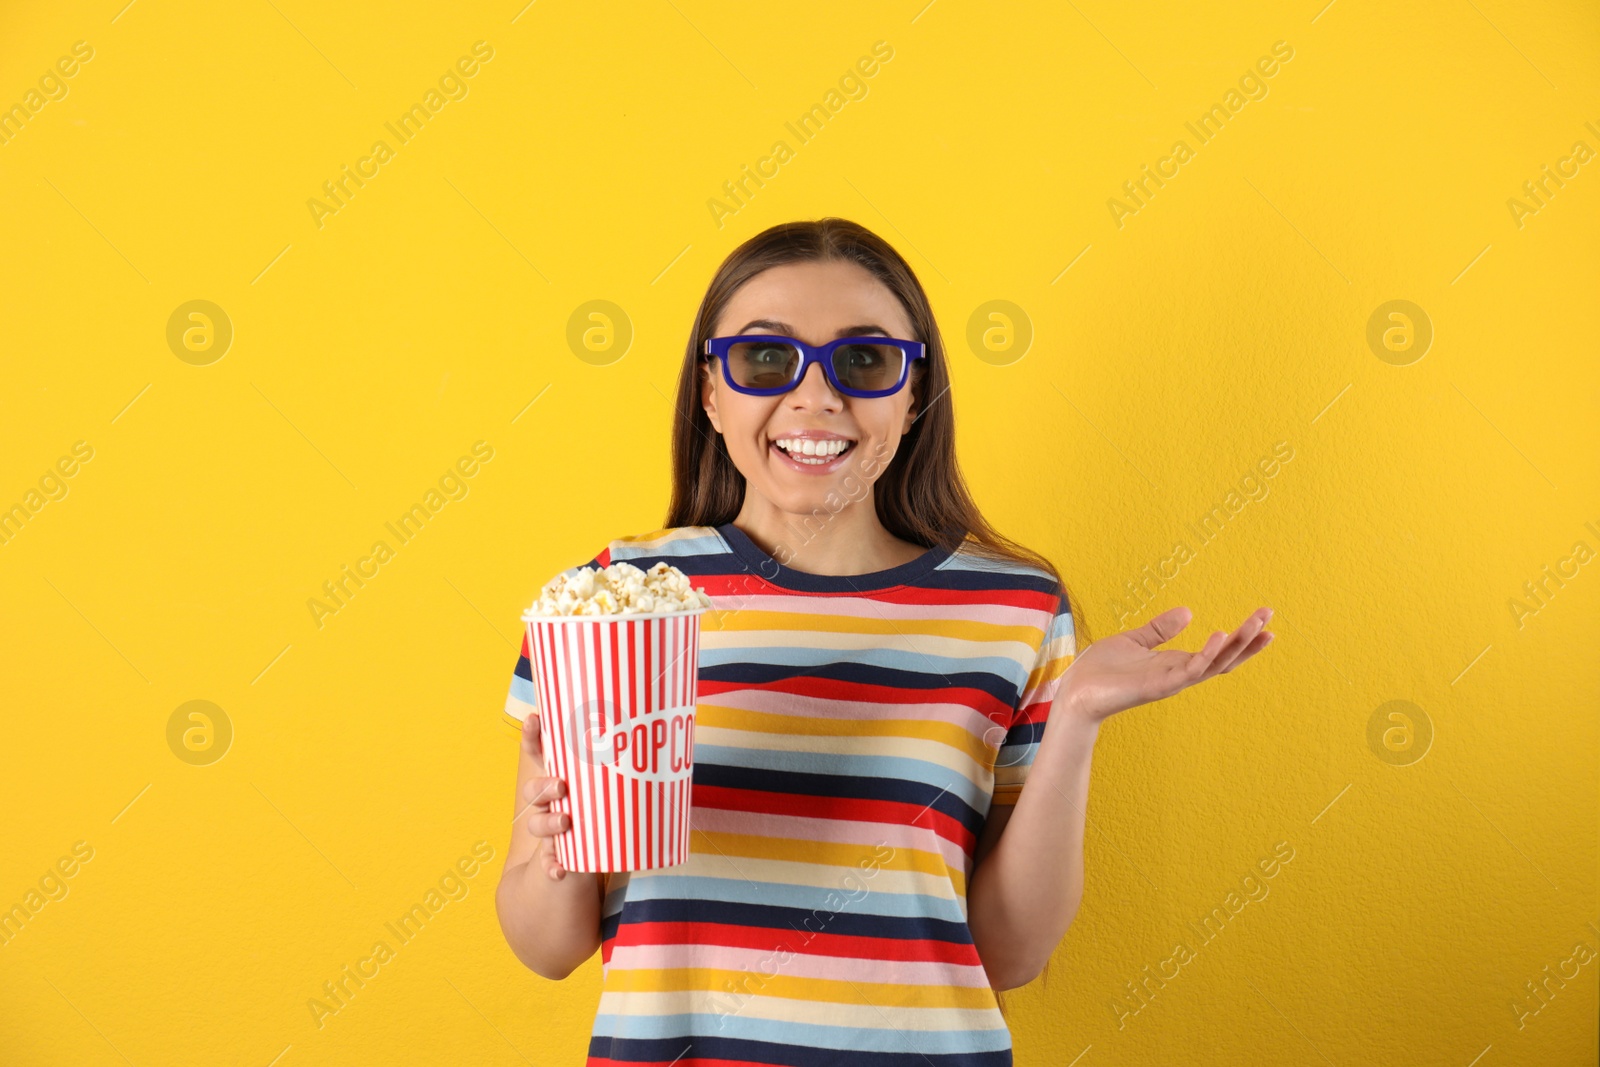 Photo of Emotional woman with 3D glasses and tasty popcorn on color background